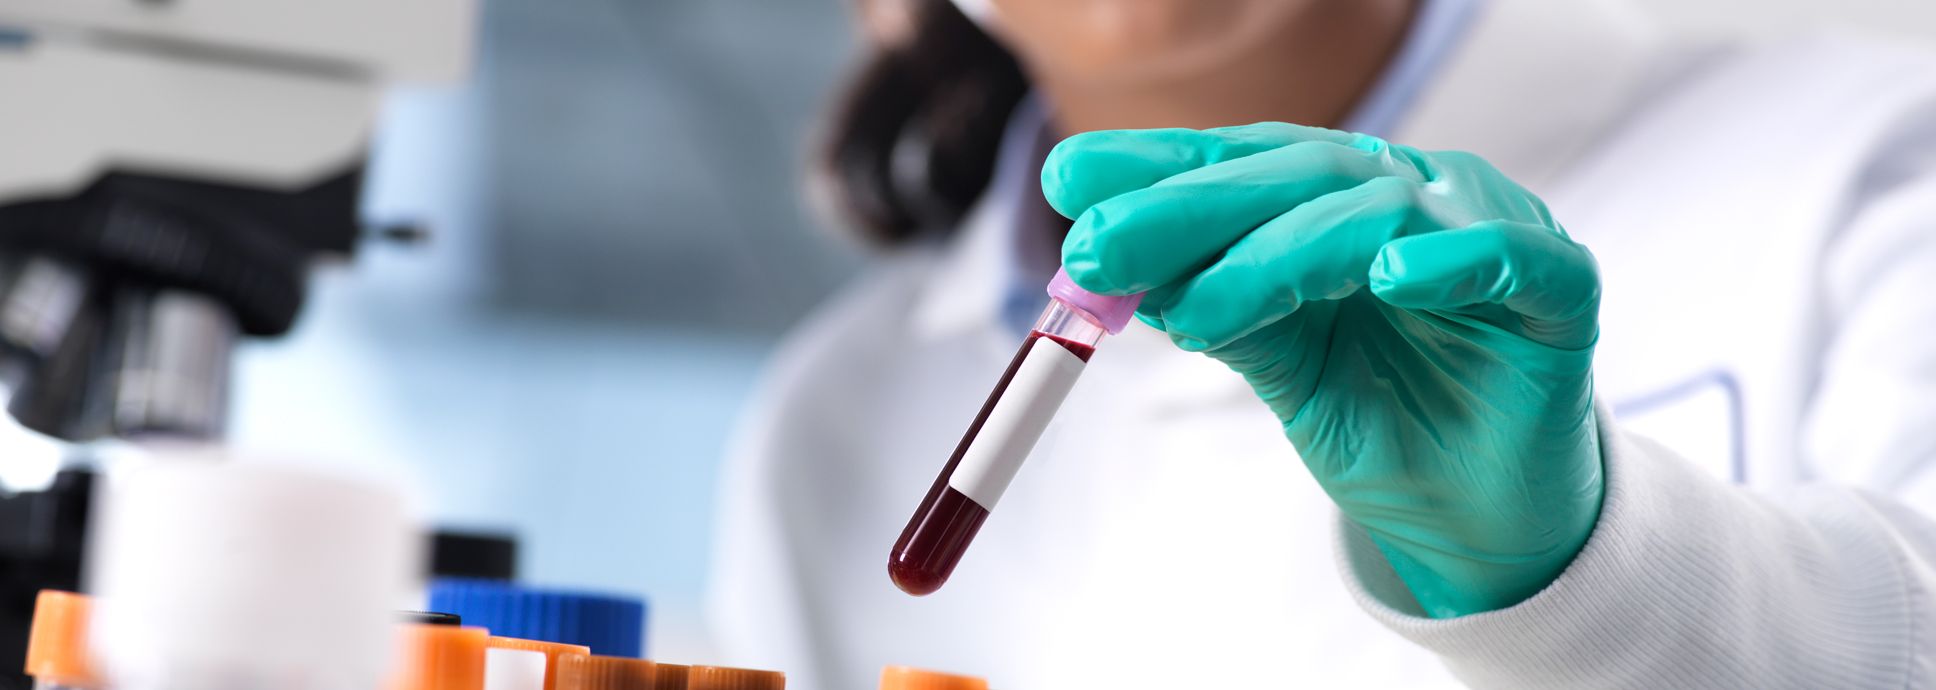 An image of a laboratory professional holding a test tube filled with blood.